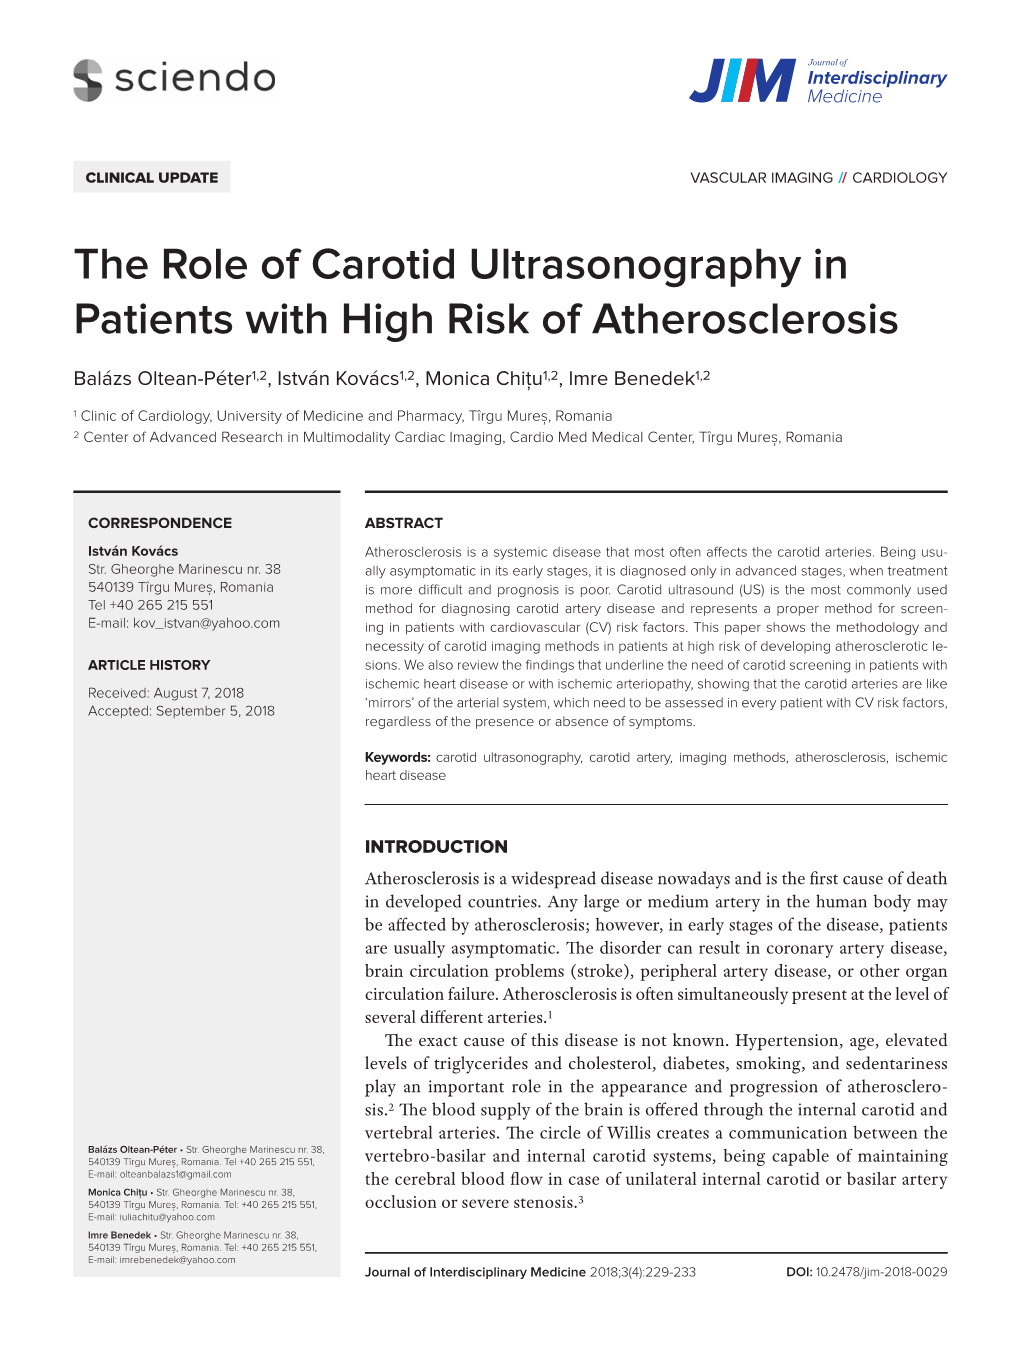 The Role of Carotid Ultrasonography in Patients with High Risk of Atherosclerosis